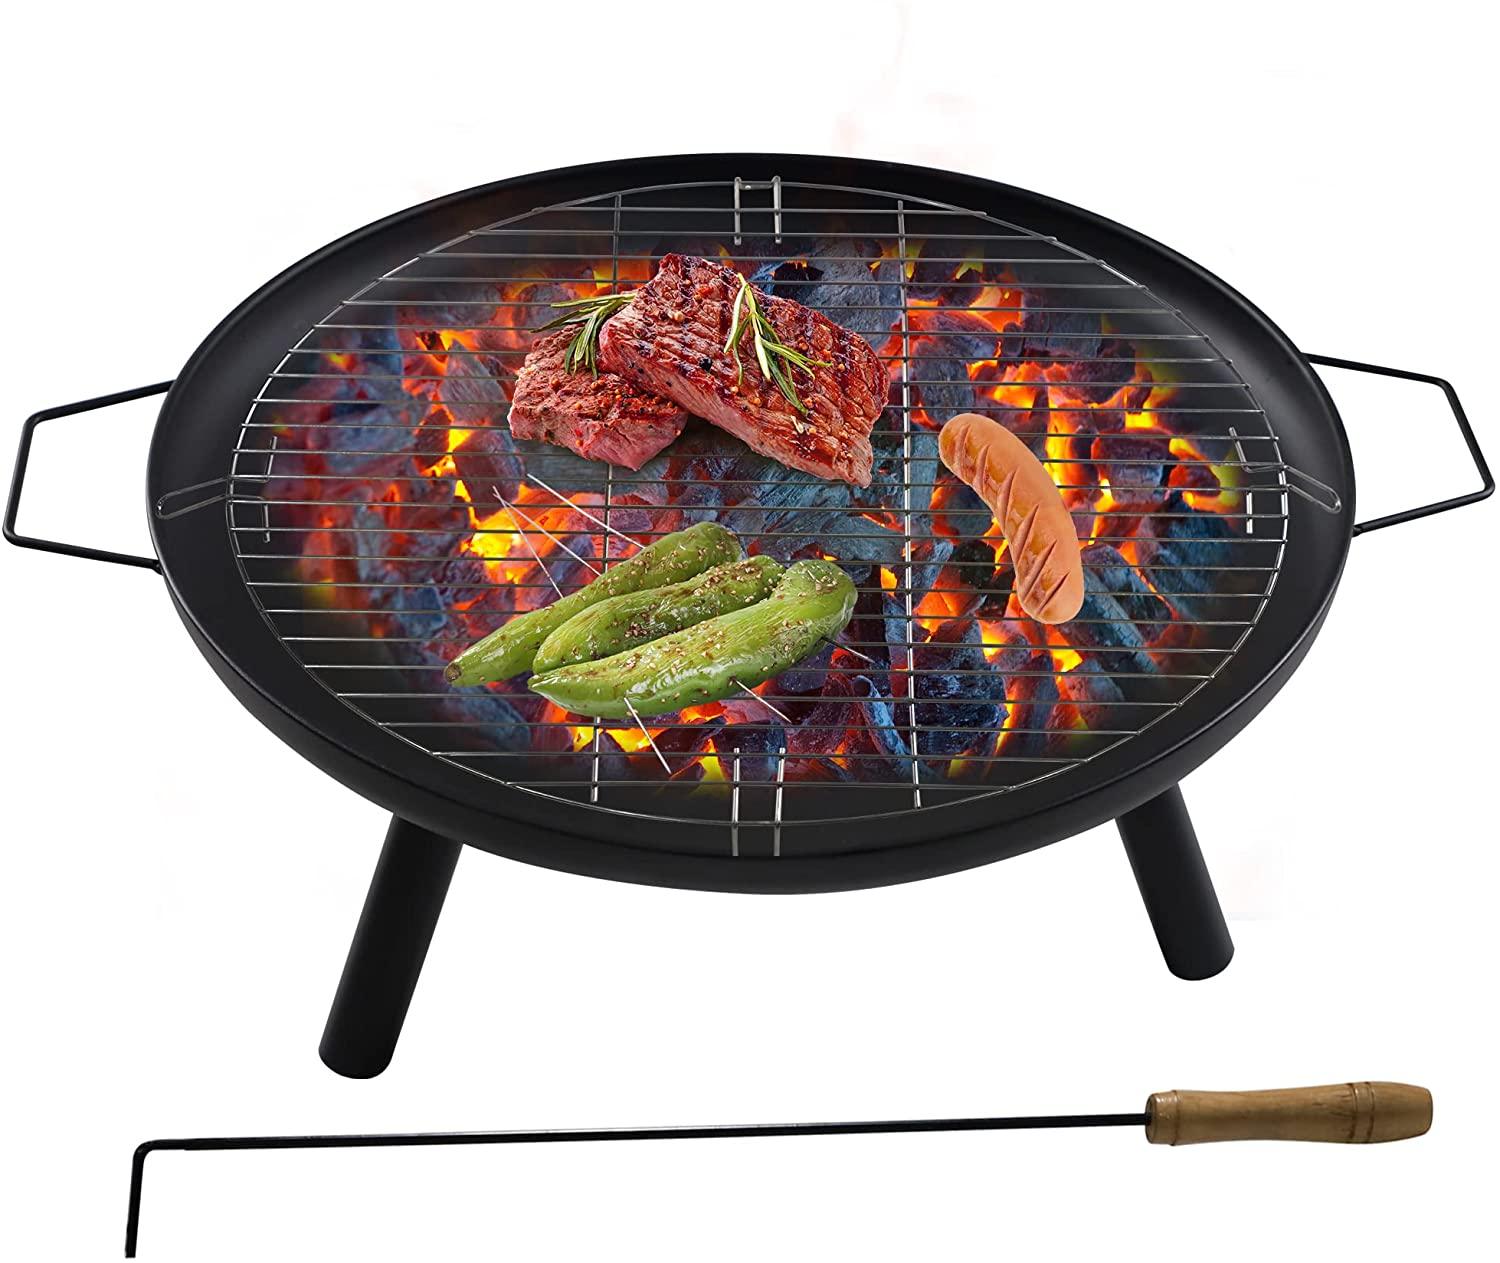 Outdoor Wood Burning Fire Bowl Easy Assembly Fireplace with Portable Poker and Grate for Camping Patio Backyard Beach Picnic - Bosonshop